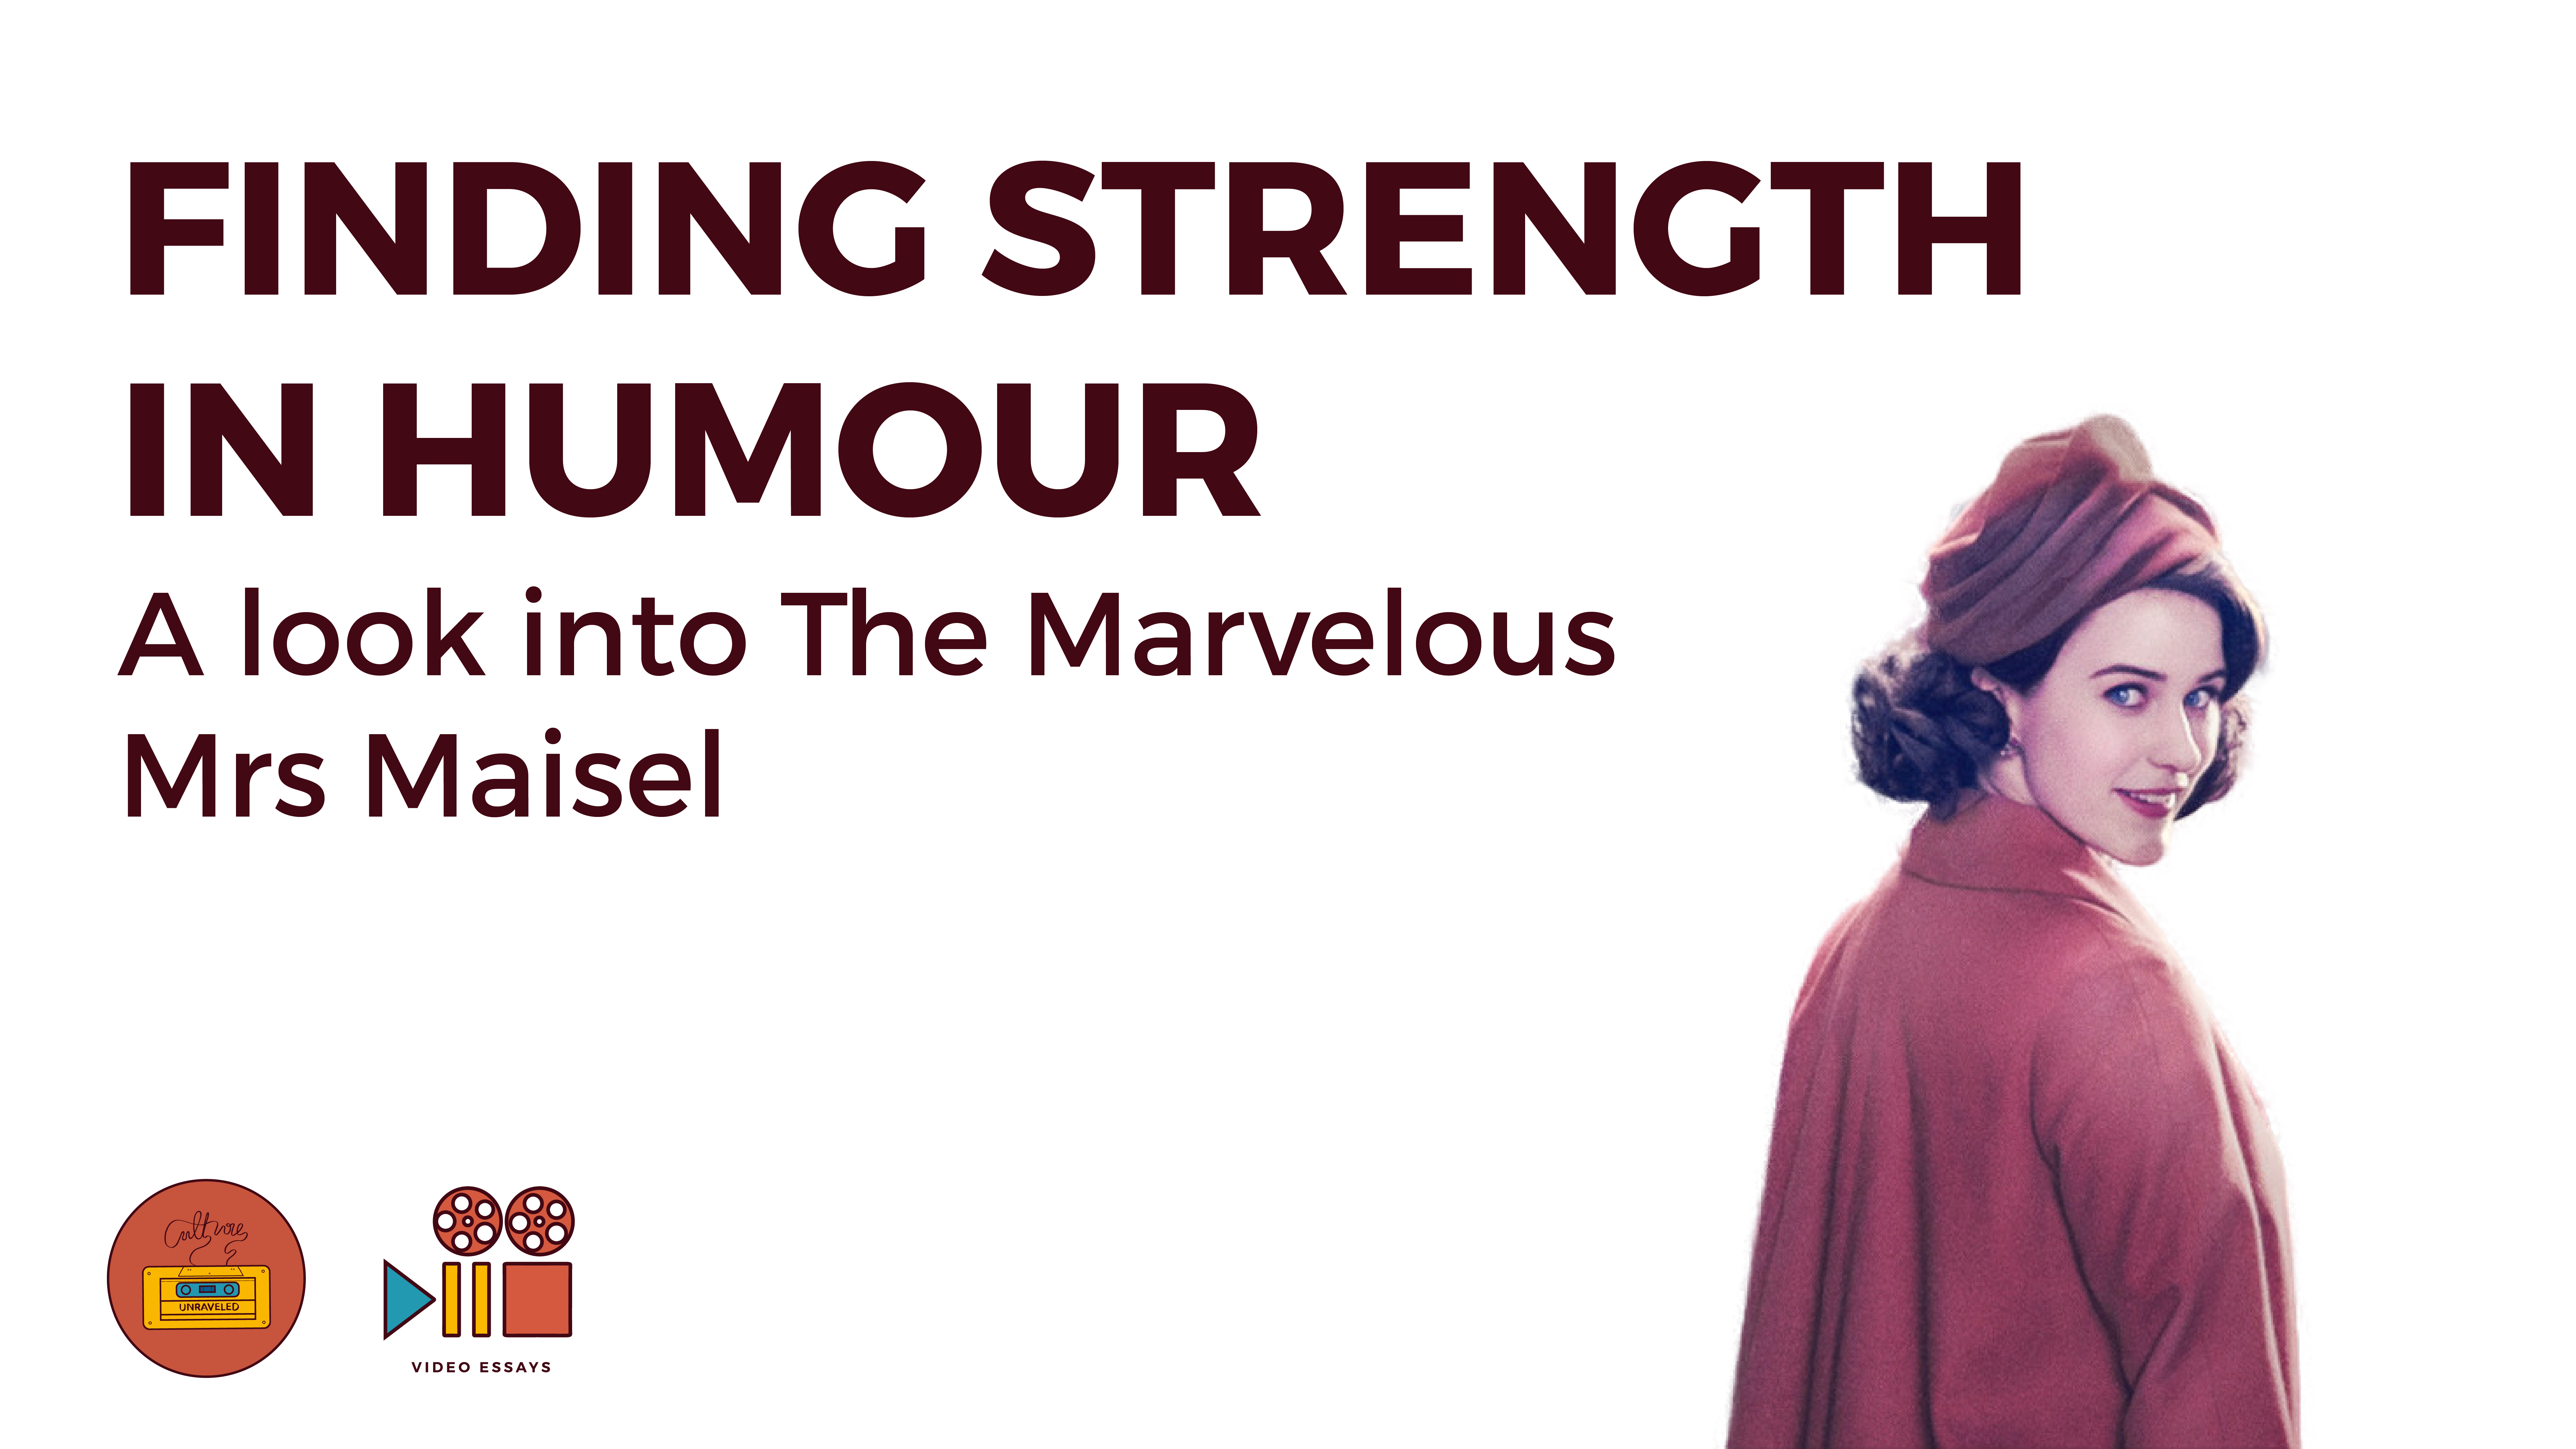 Finding Strength in Humor: A Look into The Marvelous Mrs Maisel